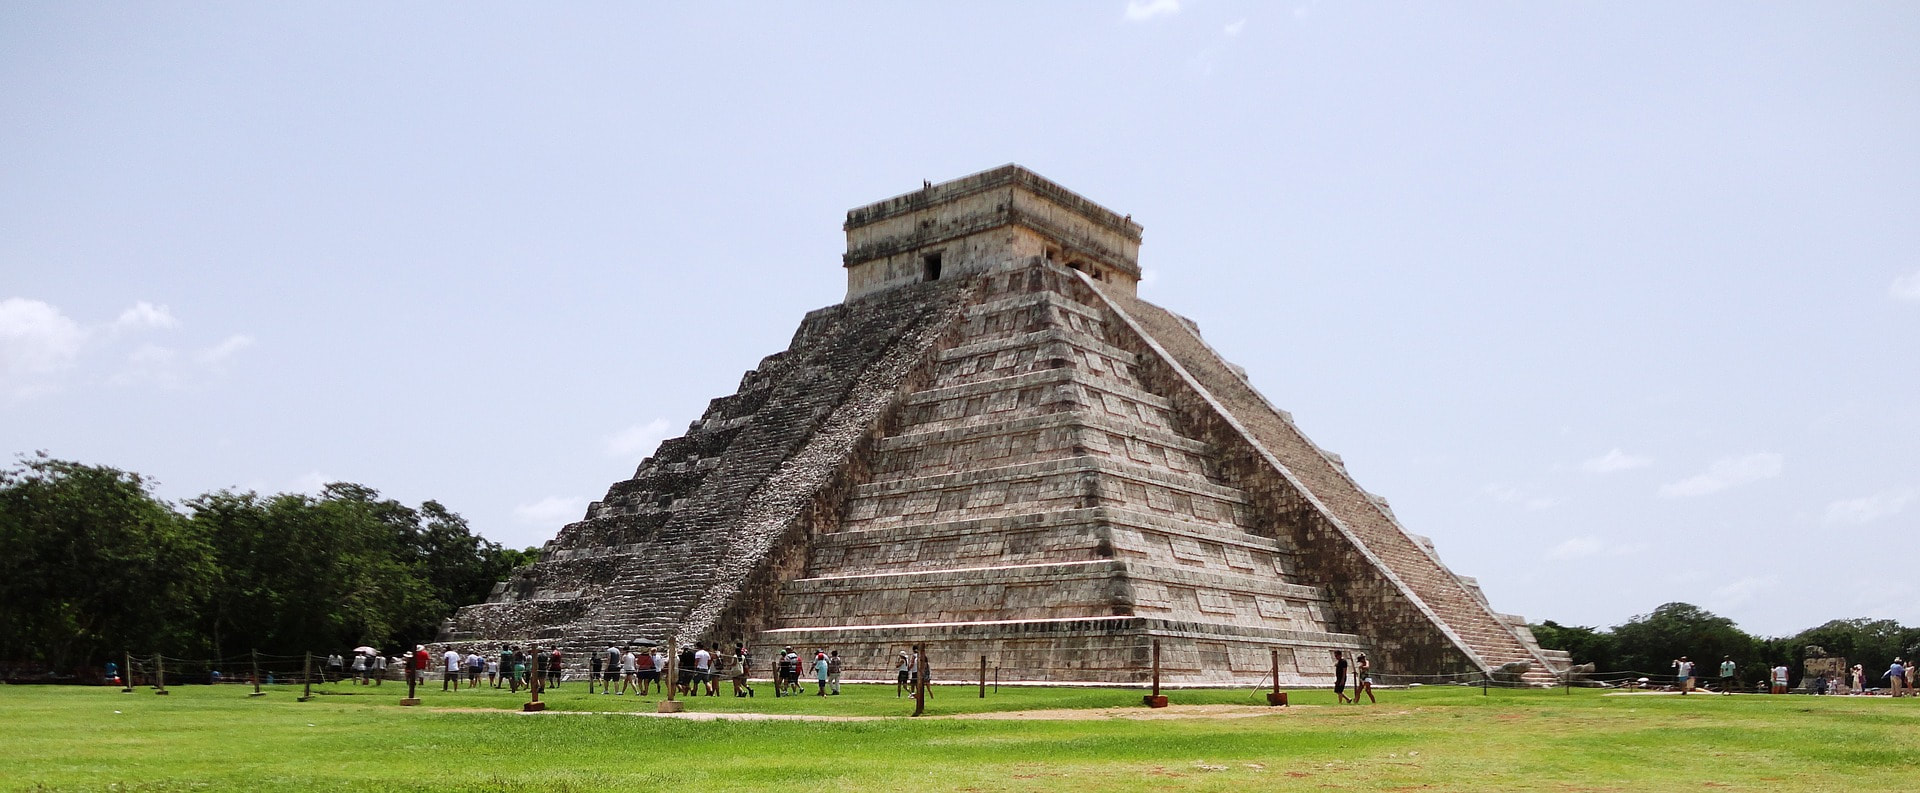 3 must visit cities in Mexico, Cancun, Cabo San Lucas, Mexico City, white sand beaches, Tulum or Chichen Itza, Angel of Independence, Kukulcan Boulevard, Las Perlas, Playa Langosta, Playa Tortugas, Playa Caracol, Playa Monumentos, Playa Palmilla, or Playa Chileno, Arch of Cabo San Lucas, Feet Do Travel